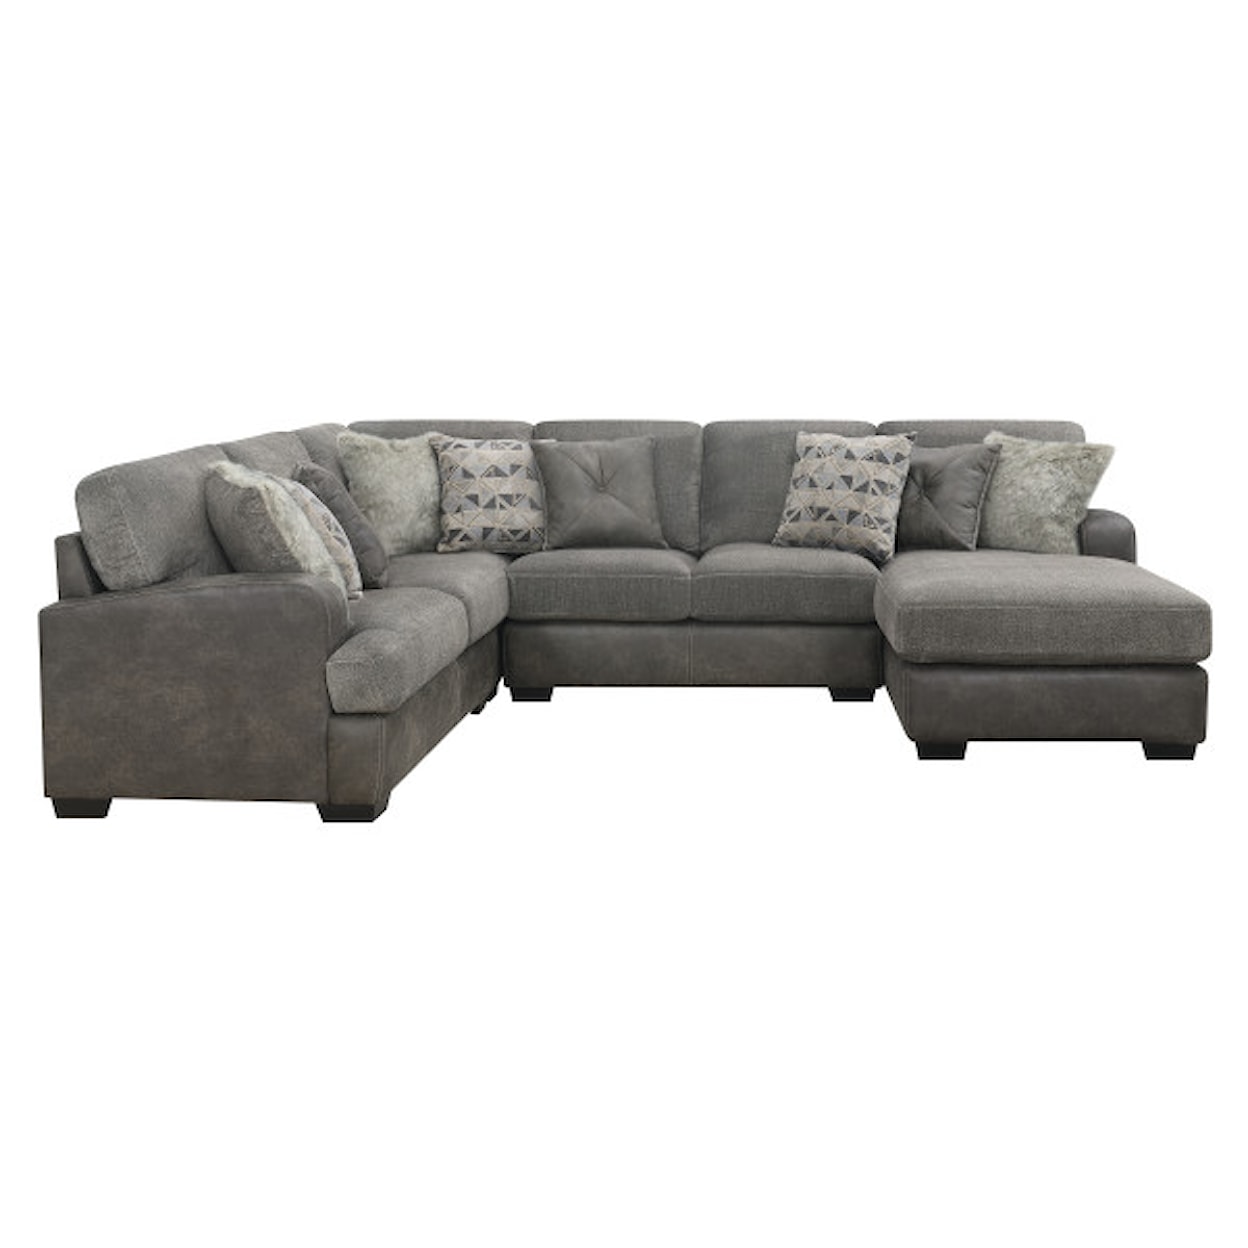 Emerald Berlin 4-Piece Sectional with RSF Chaise